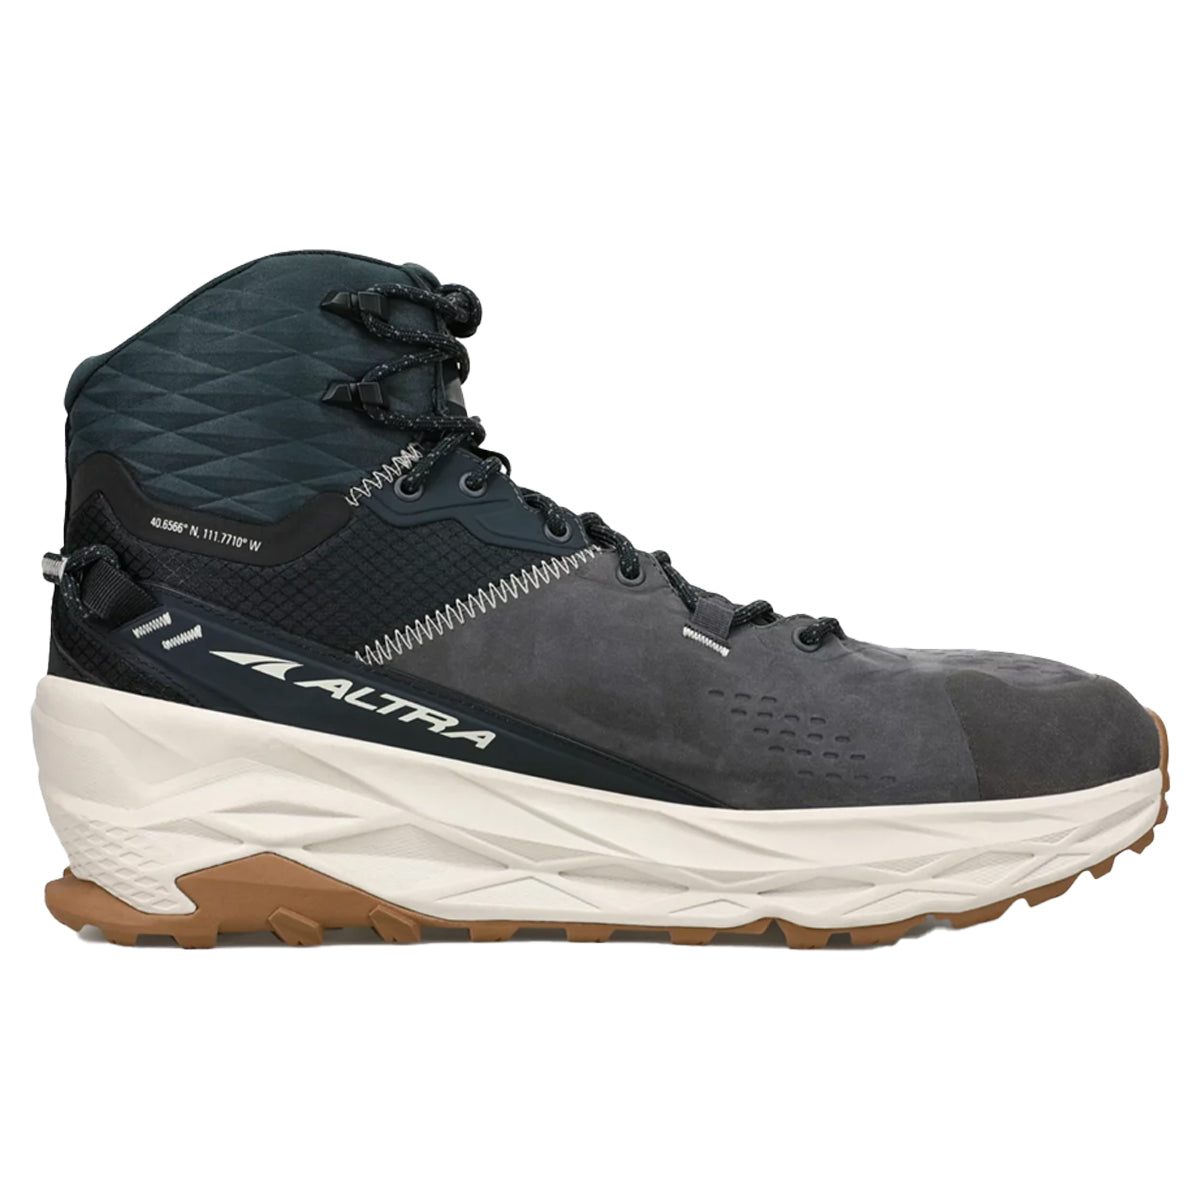 Altra Olympus 5 Hike Mid GTX in Black & Gray by GOHUNT | Altra - GOHUNT Shop